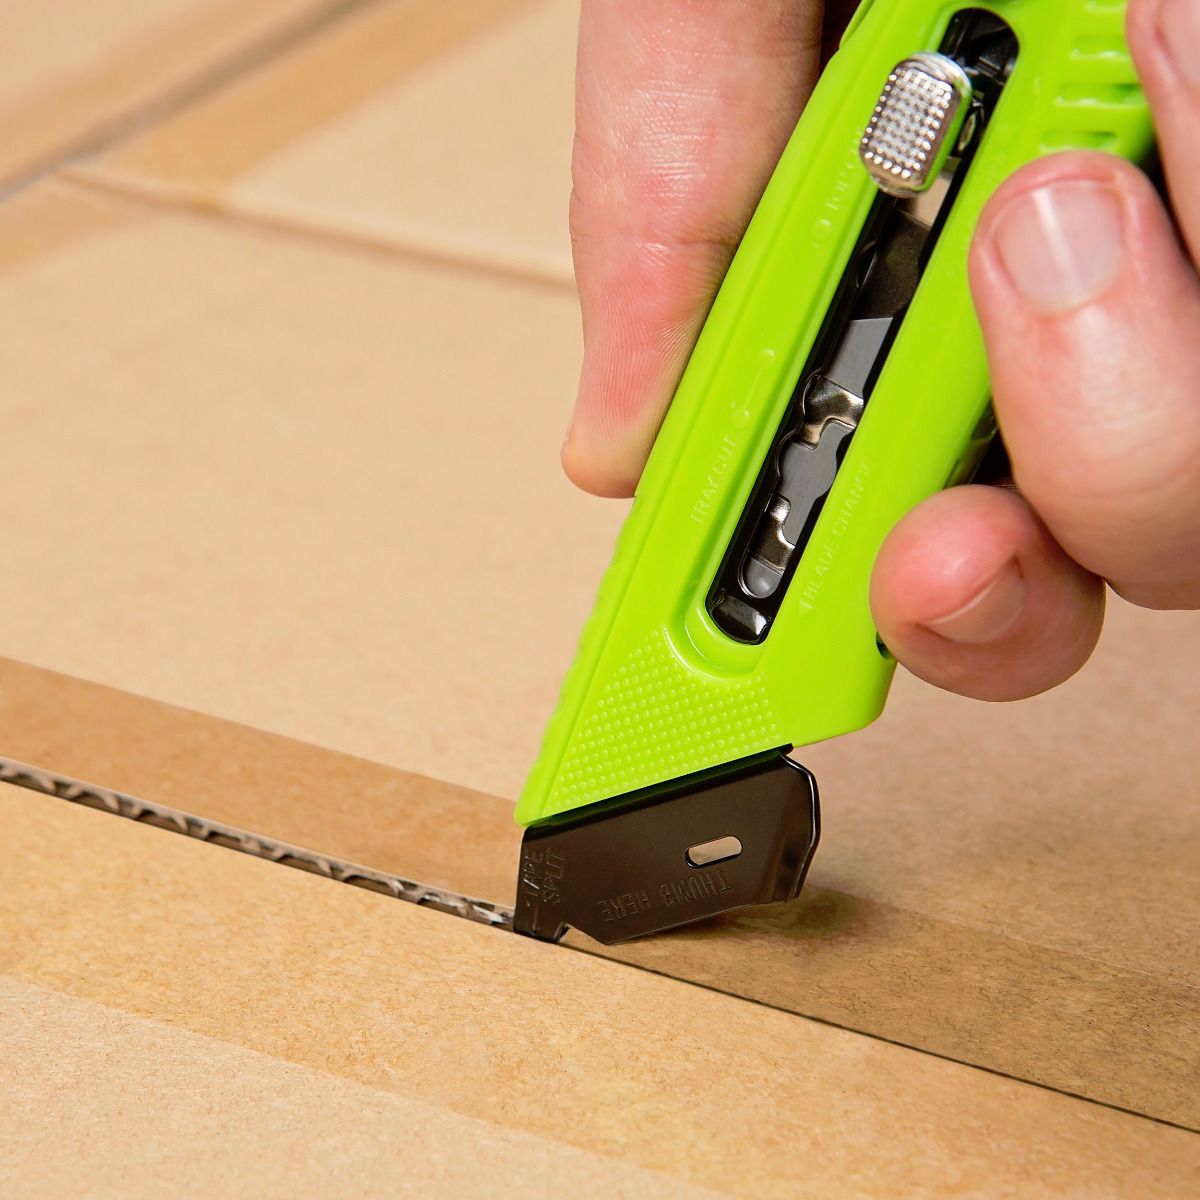 How to Use a Box Cutter Safely - WebstaurantStore